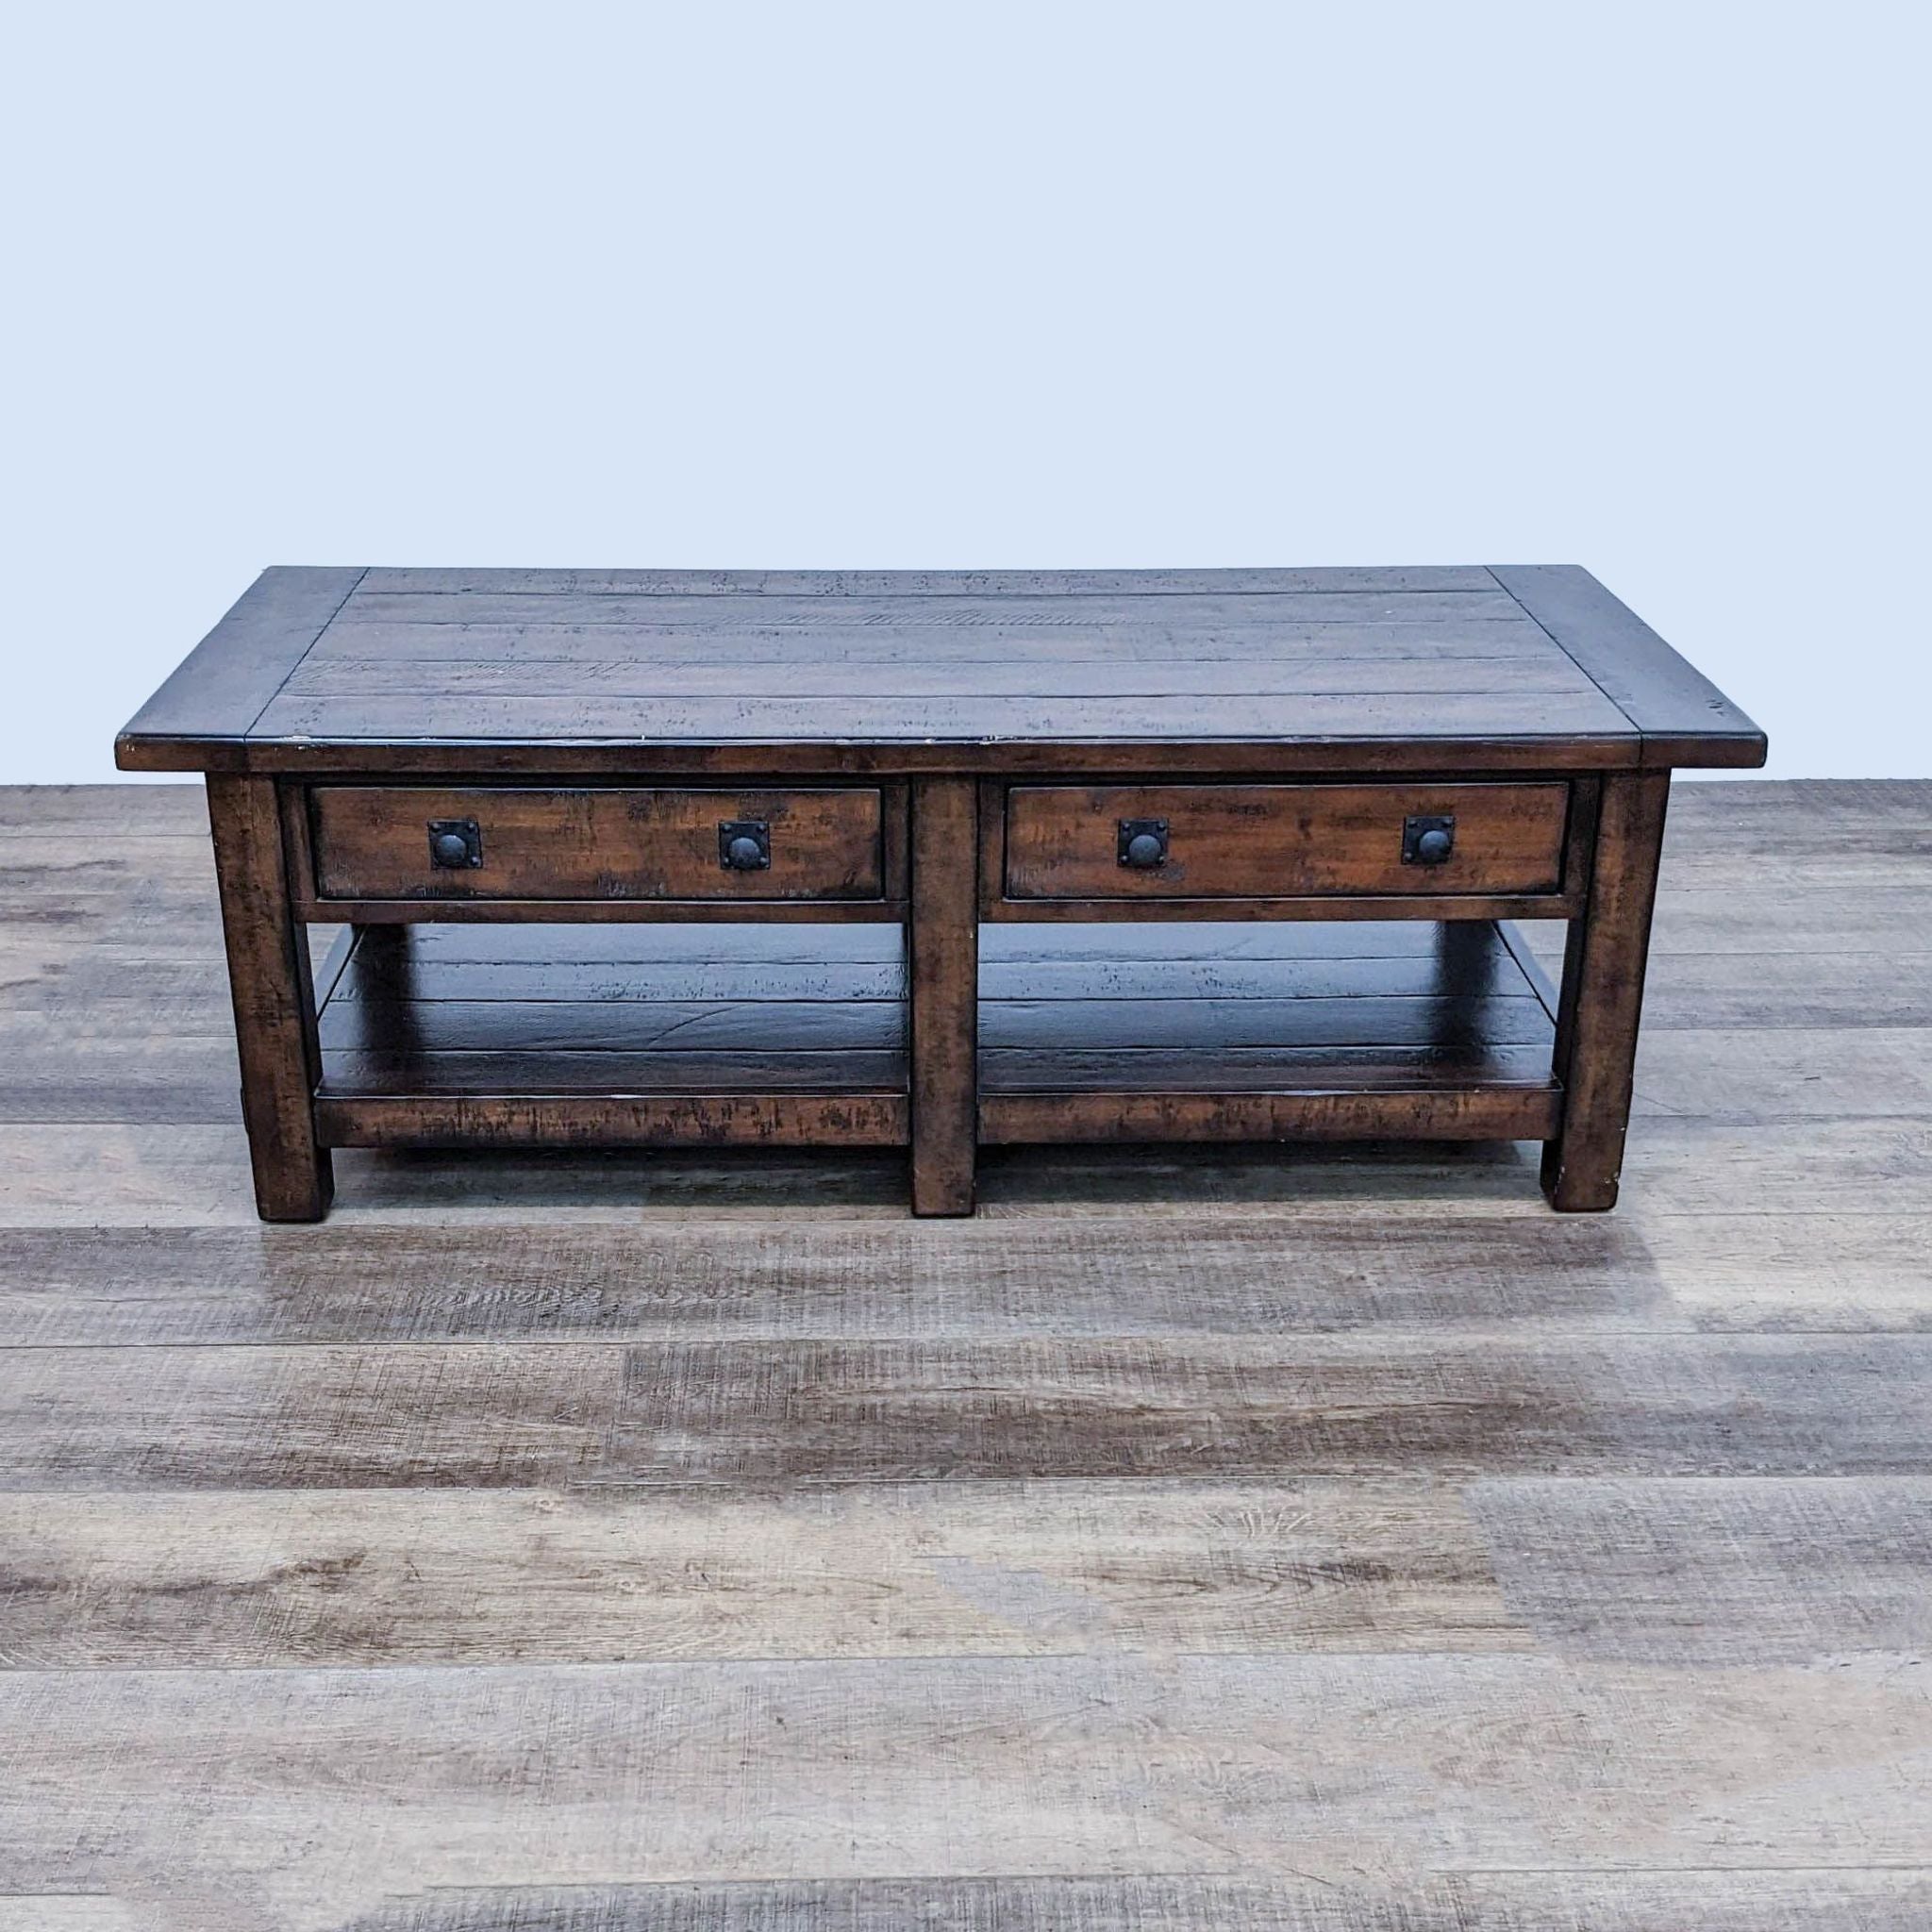 Reperch Coffee Table: Planked top, multiple drawers with metal handles on wooden flooring.